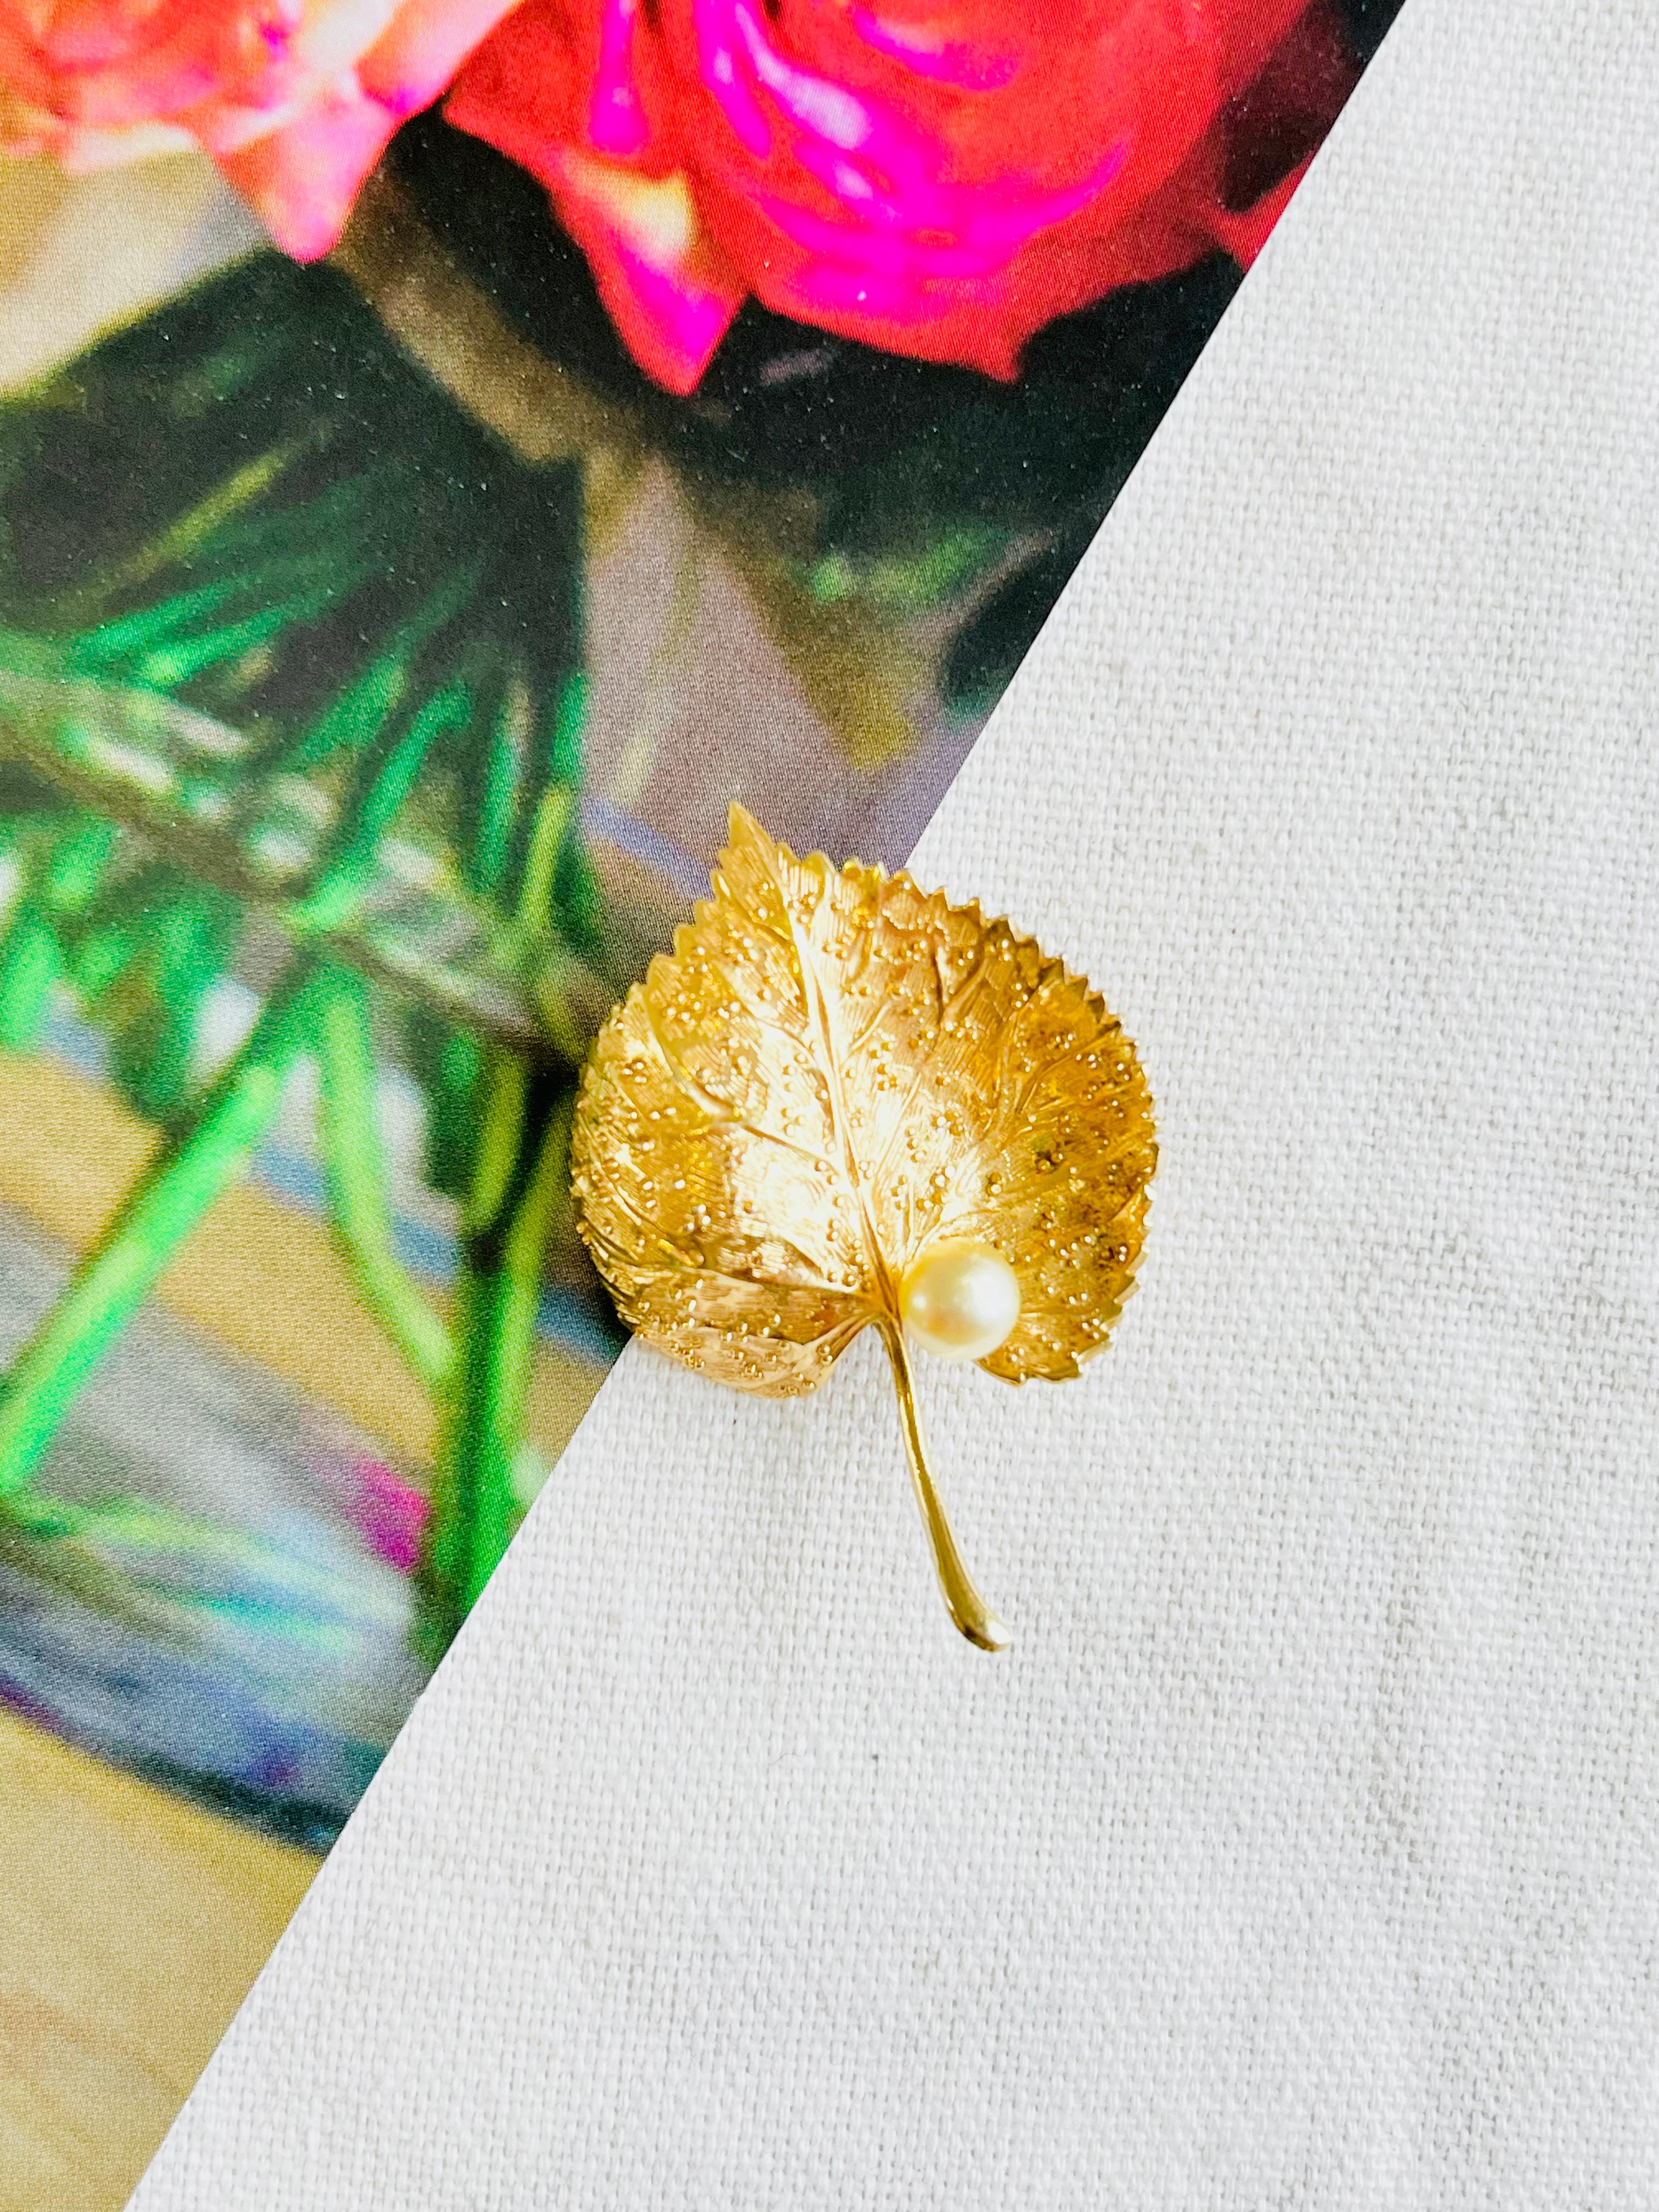 Very excellent condition. 100% genuine.

A unique piece. This is gold plated stylised brooch. Very light scratches at back.

Safety-catch pin closure.

Size: 4.6 cm x 3.1 cm.

Weight: 8.0 g.

_ _ _

Great for everyday wear. Come with velvet pouch